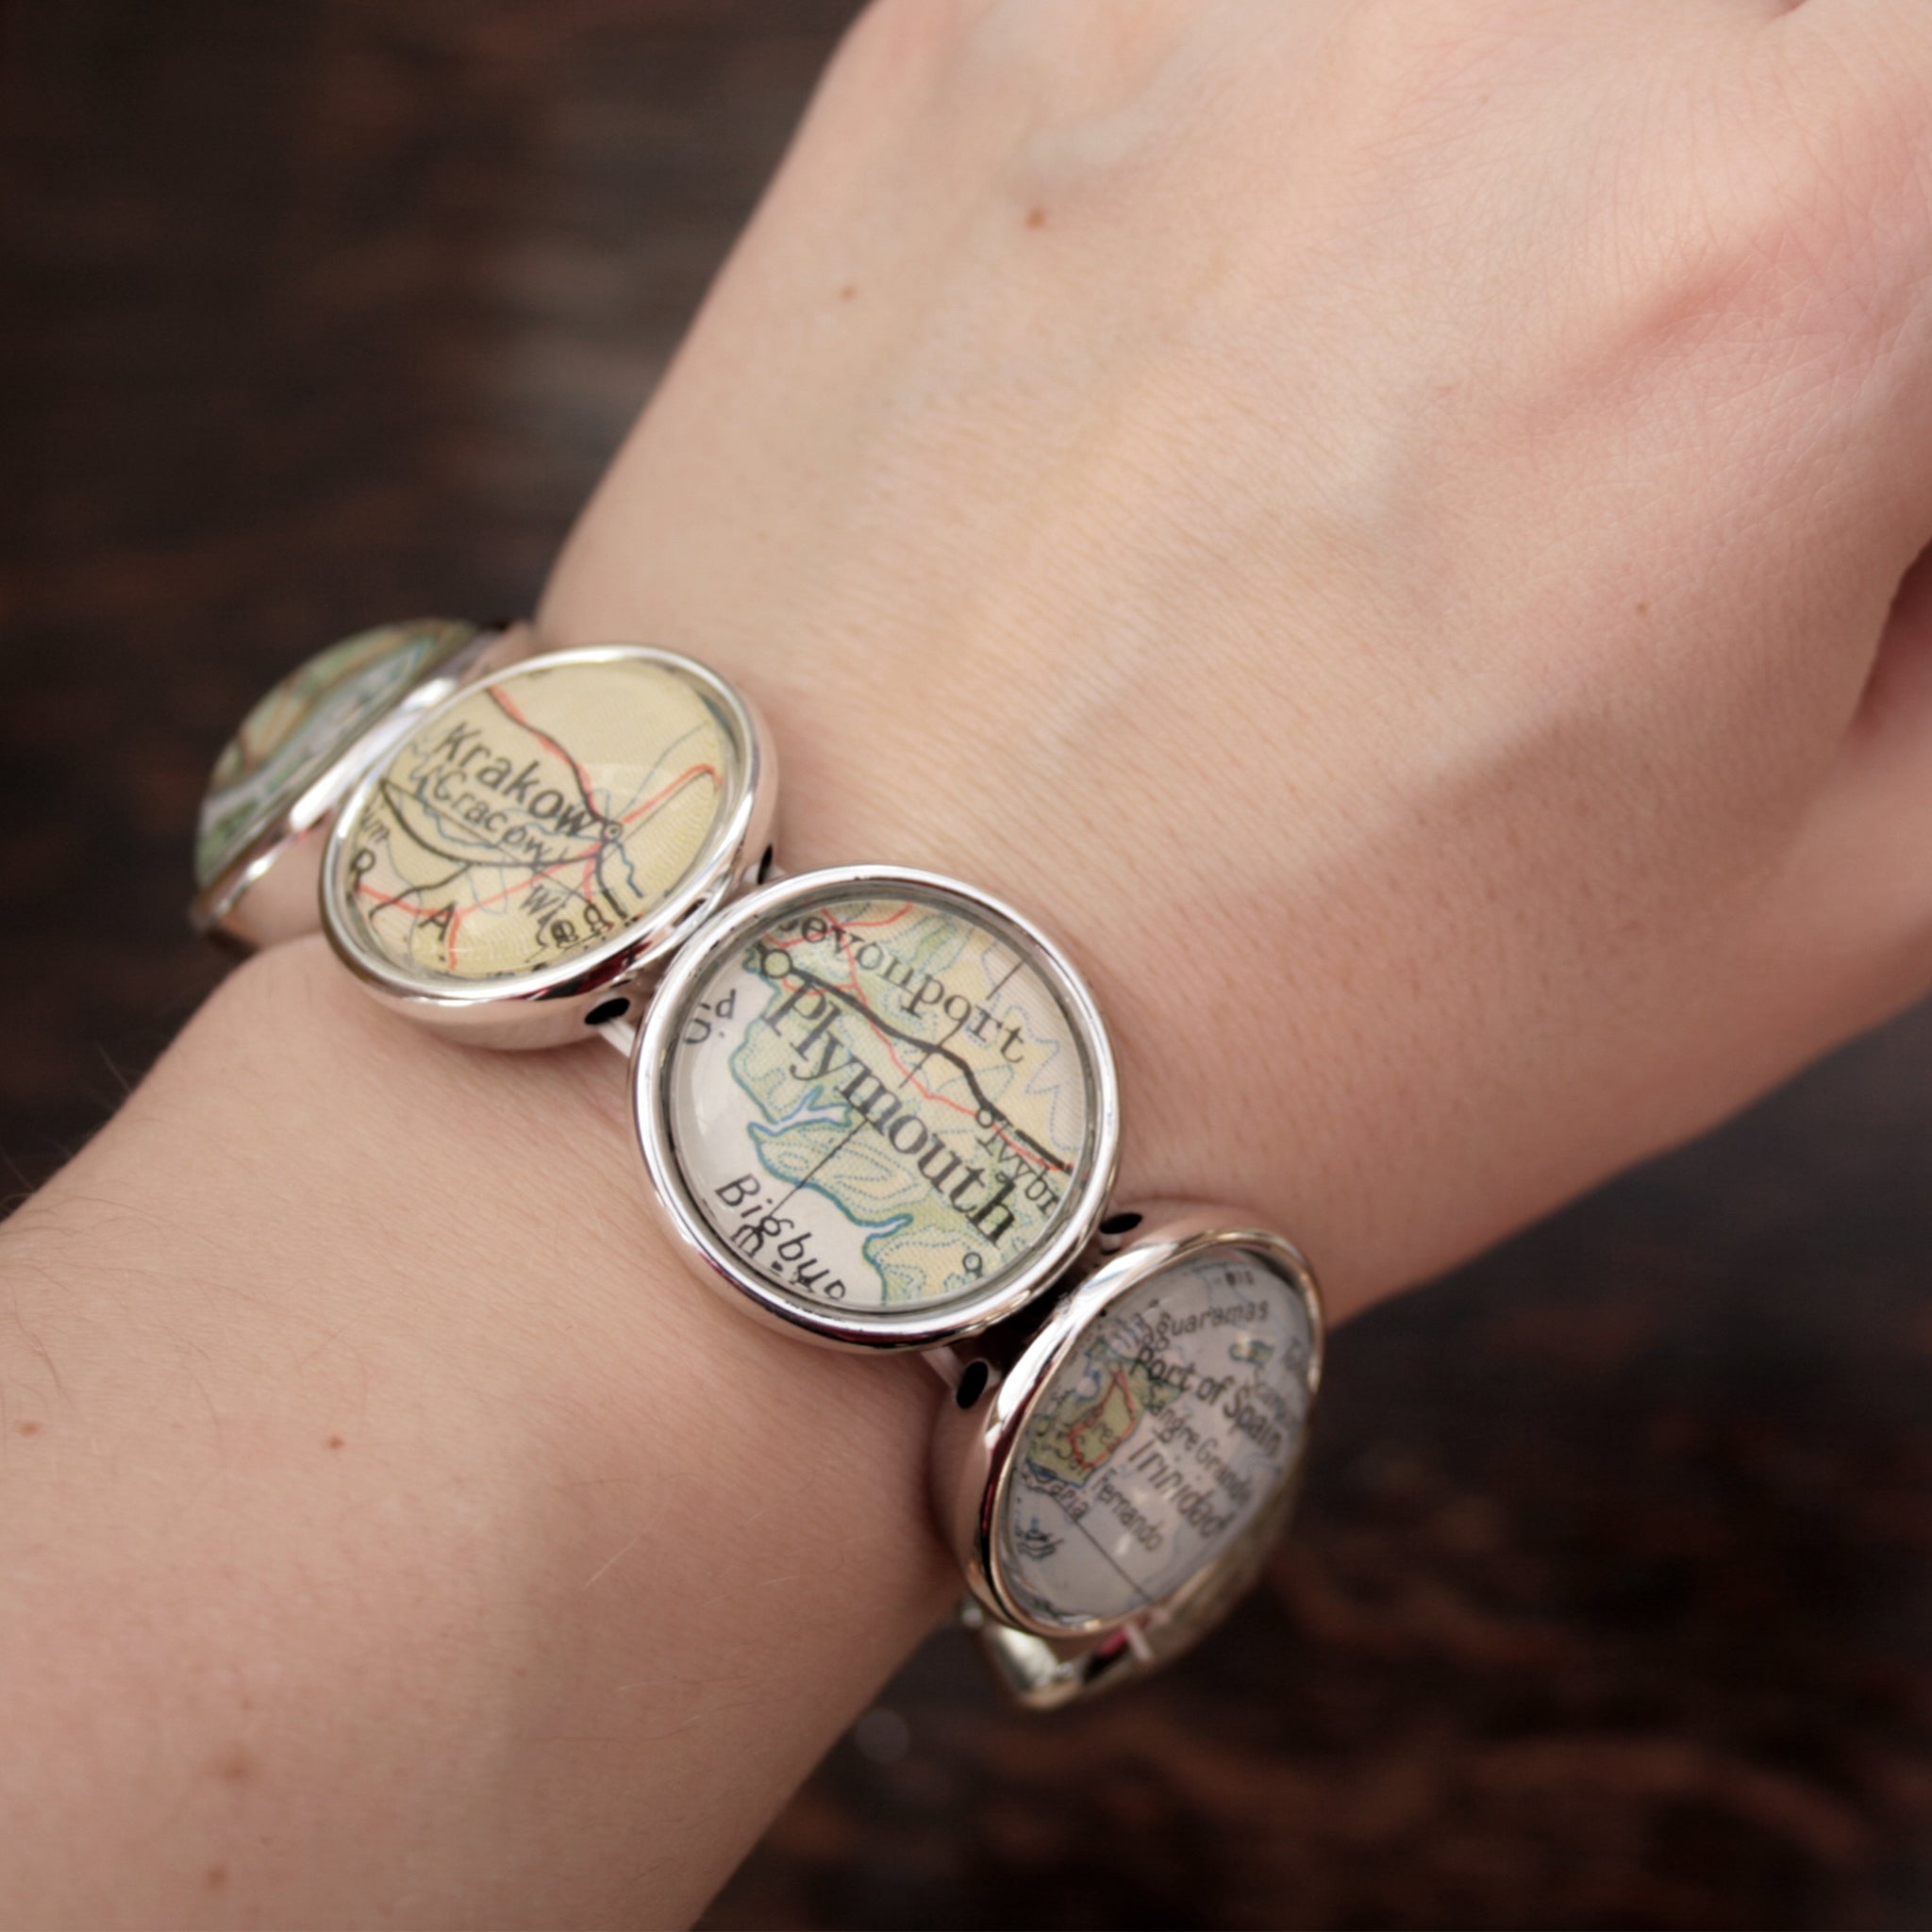 Worn on hand Stretchy bracelet in silver tone featuring custom map locations